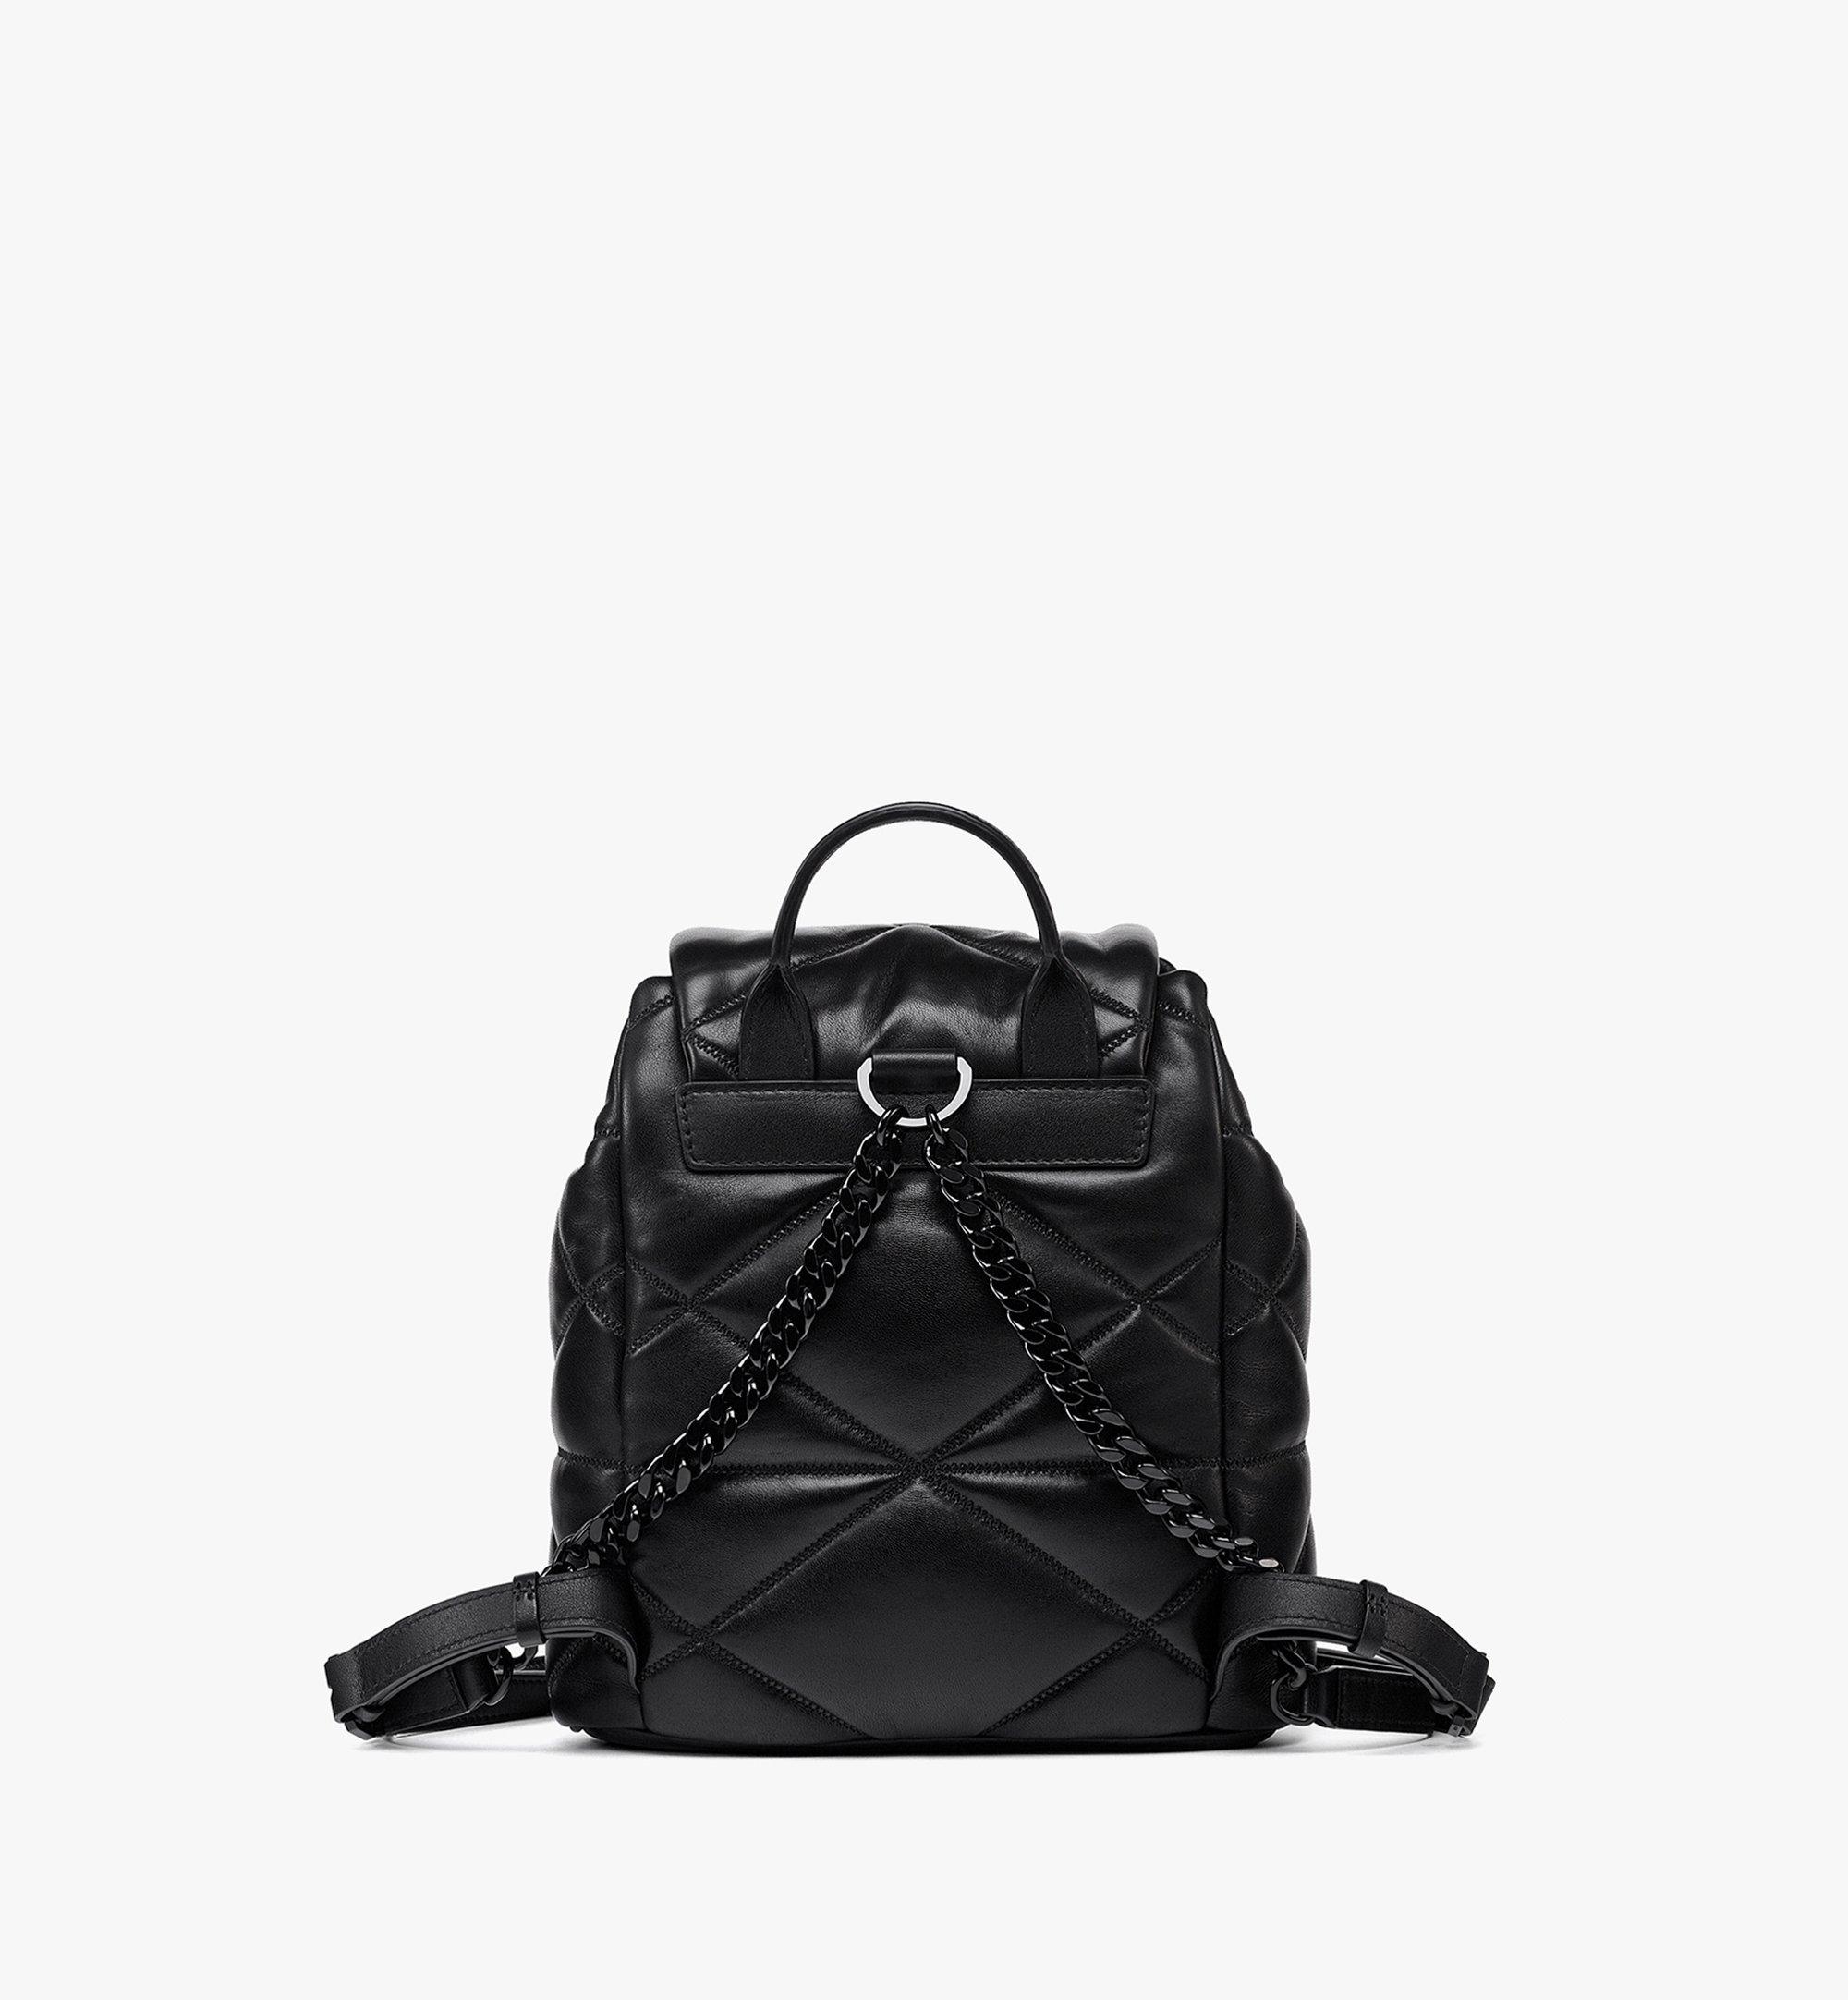 MCM Travia Backpack in Cloud Quilted Lamb Leather Black MWKDALM01BK001 Alternate View 3